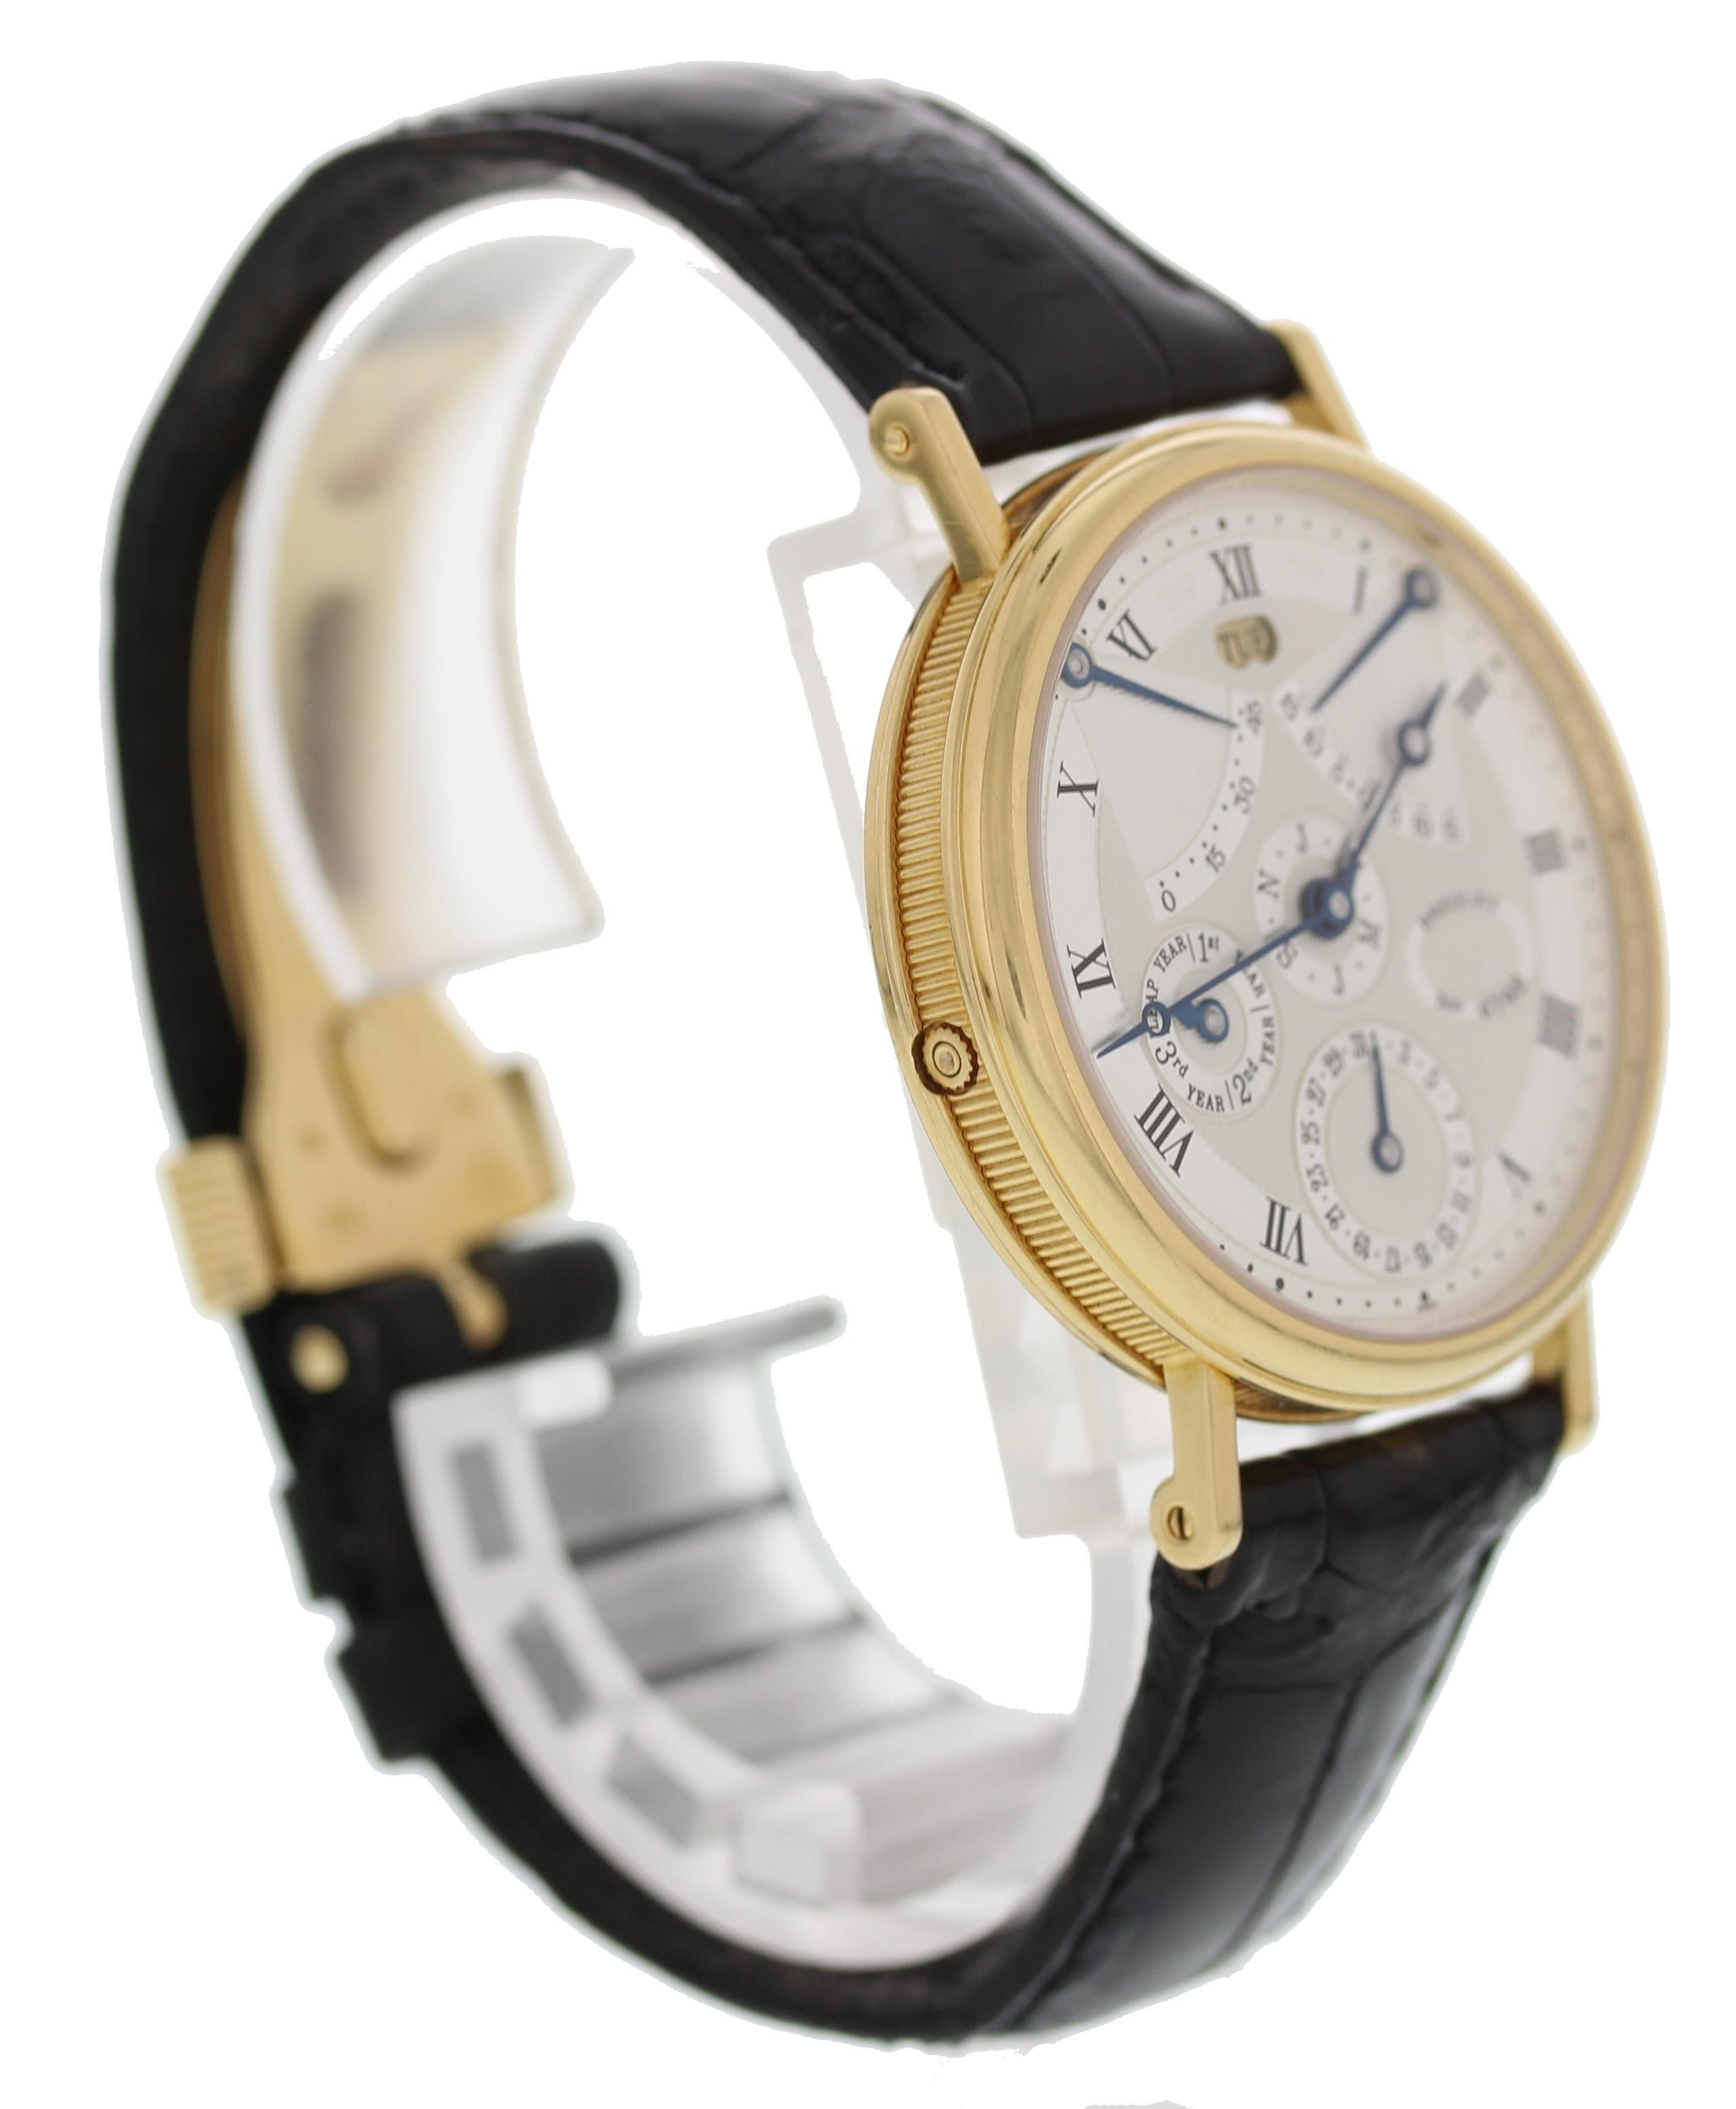 Men's Breguet 3477 Equation of Time. 18K Yellow Gold 36mm case. Silver Dial with Perpetual Calendar. This watch features a Day Window (at the 12 o'clock), Date (between 5 and 6 markers), Month (small hand at center of the dial), Leap year (sub-dial